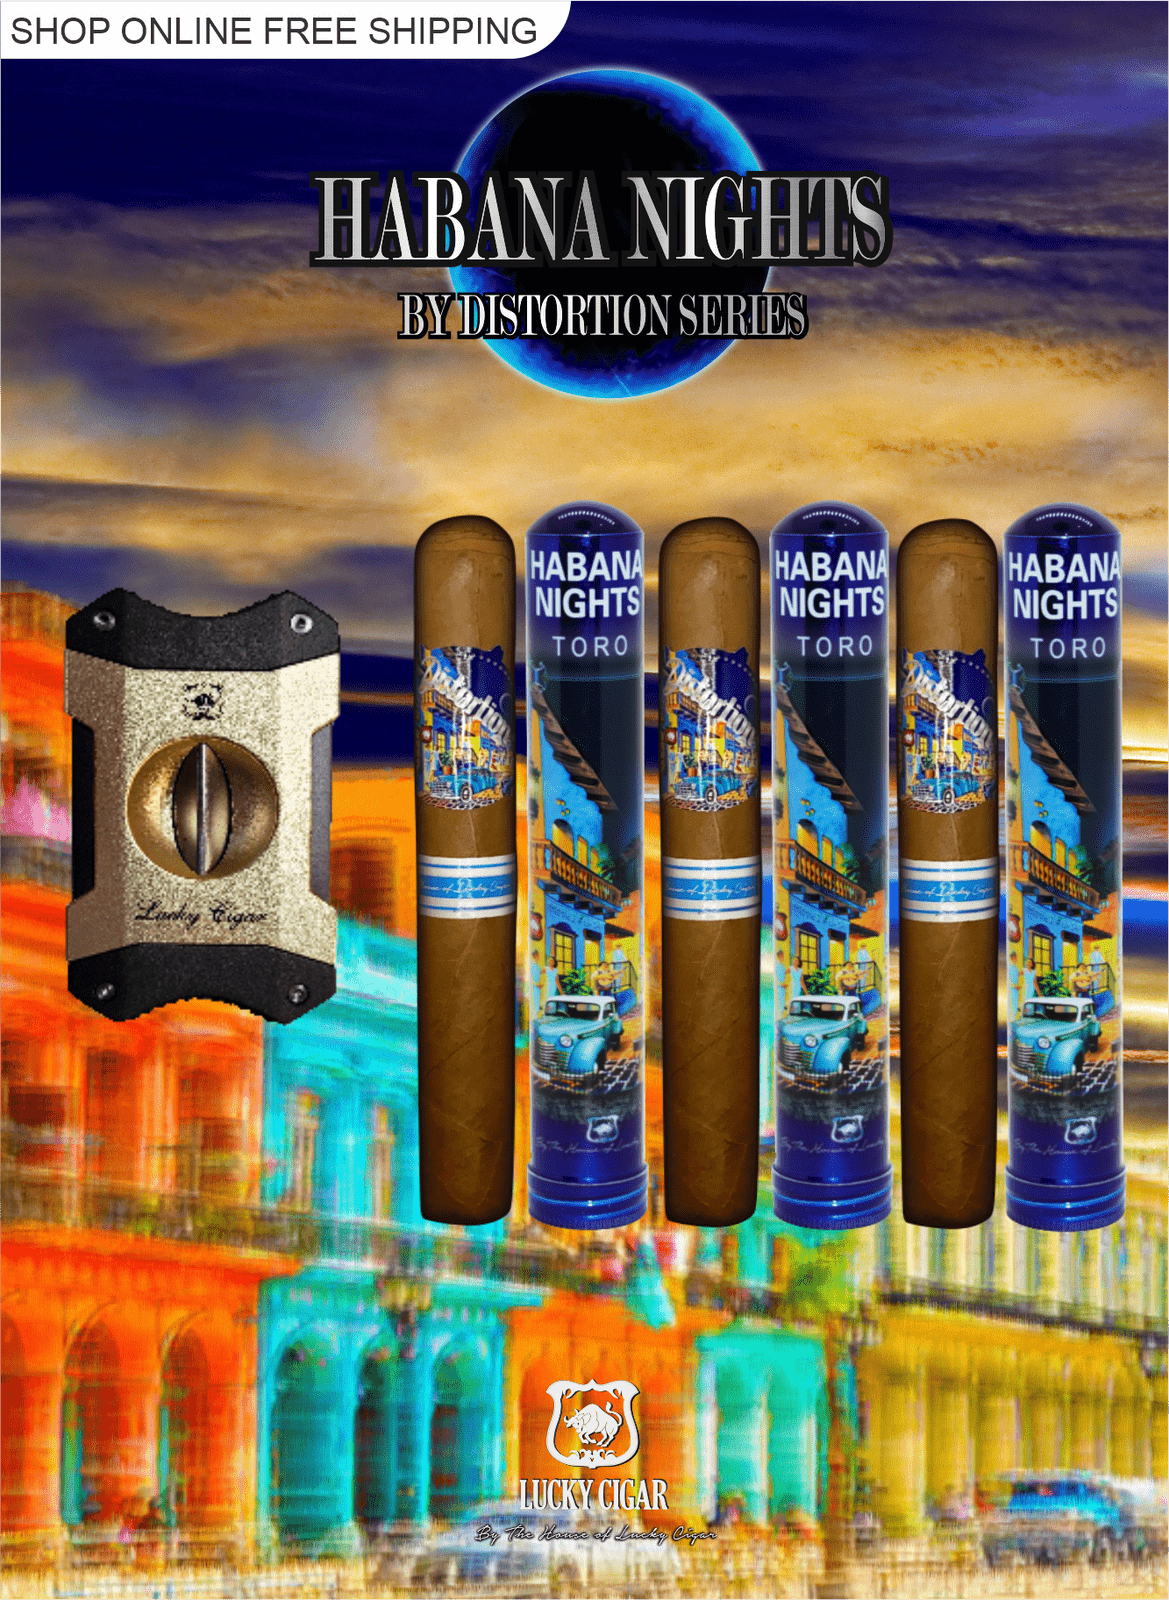 Habana Nights 6x50 Cigar From The Distortion Series: 3 Cigars with V Cutter